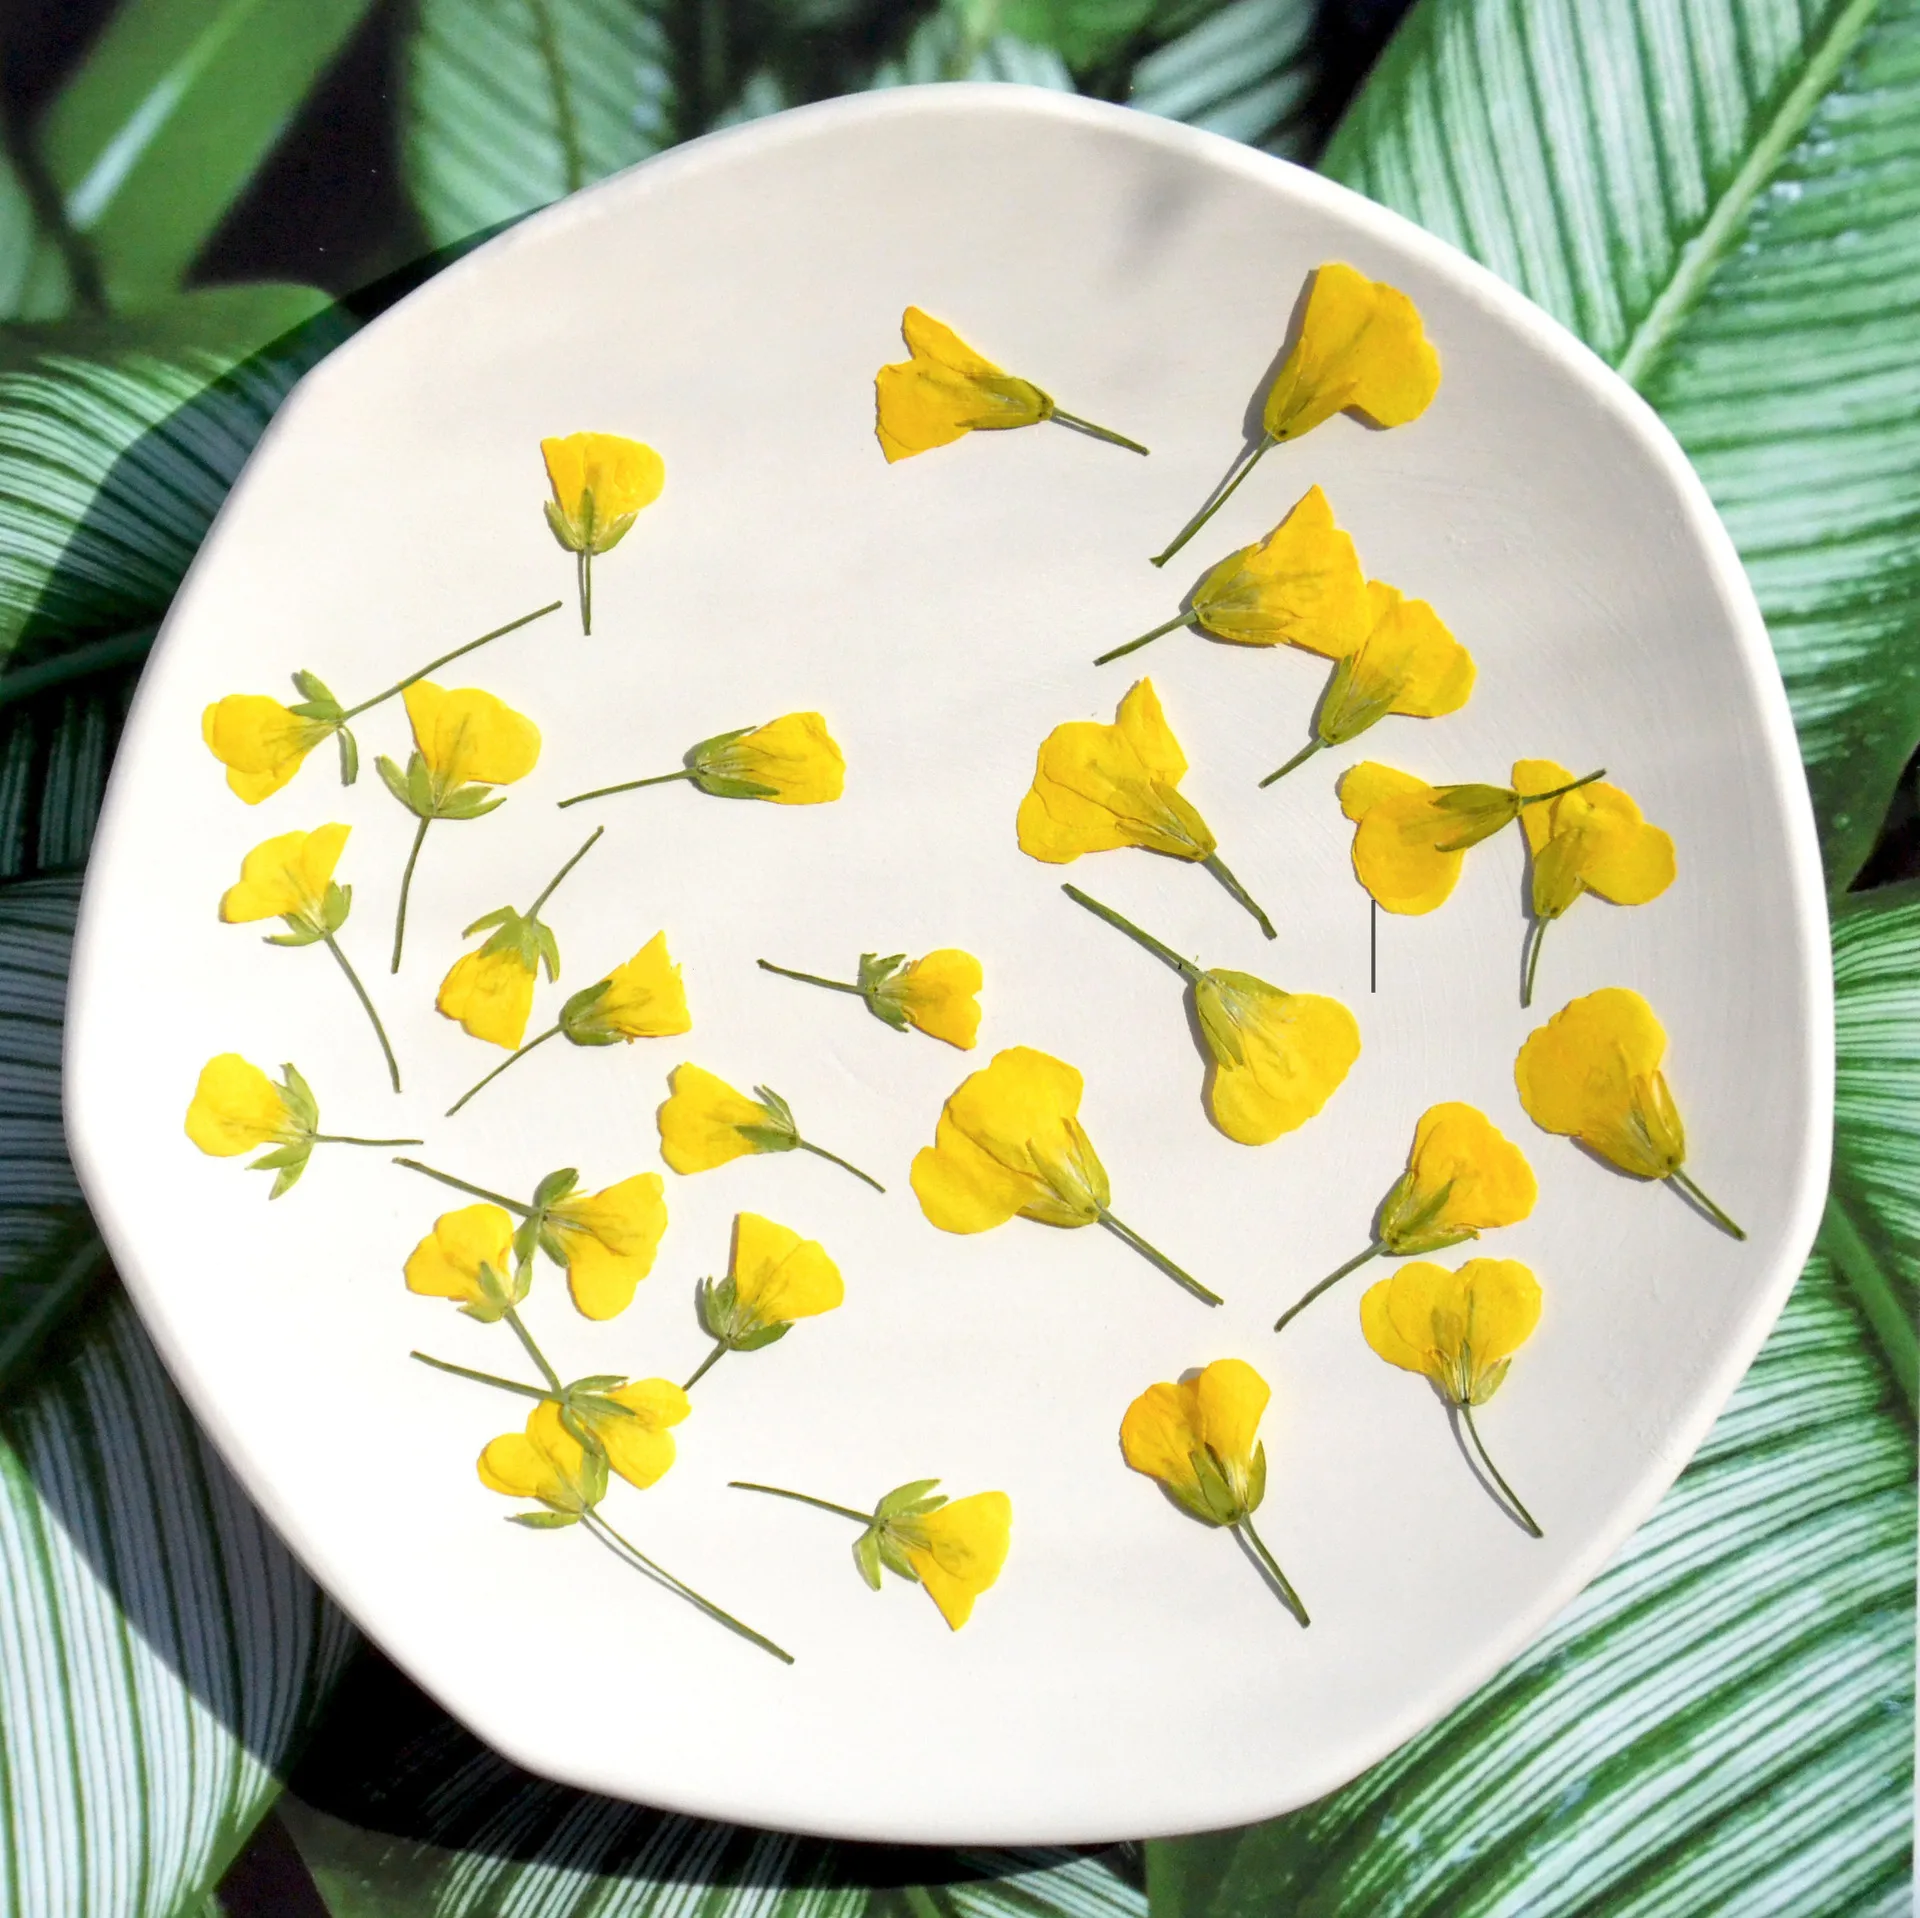 

60pcs/bag Rape Blossoms Pressed Dried Flowers for Resin, Natural Dried Flower for Resin Jewelry Making Soap and Candle Making